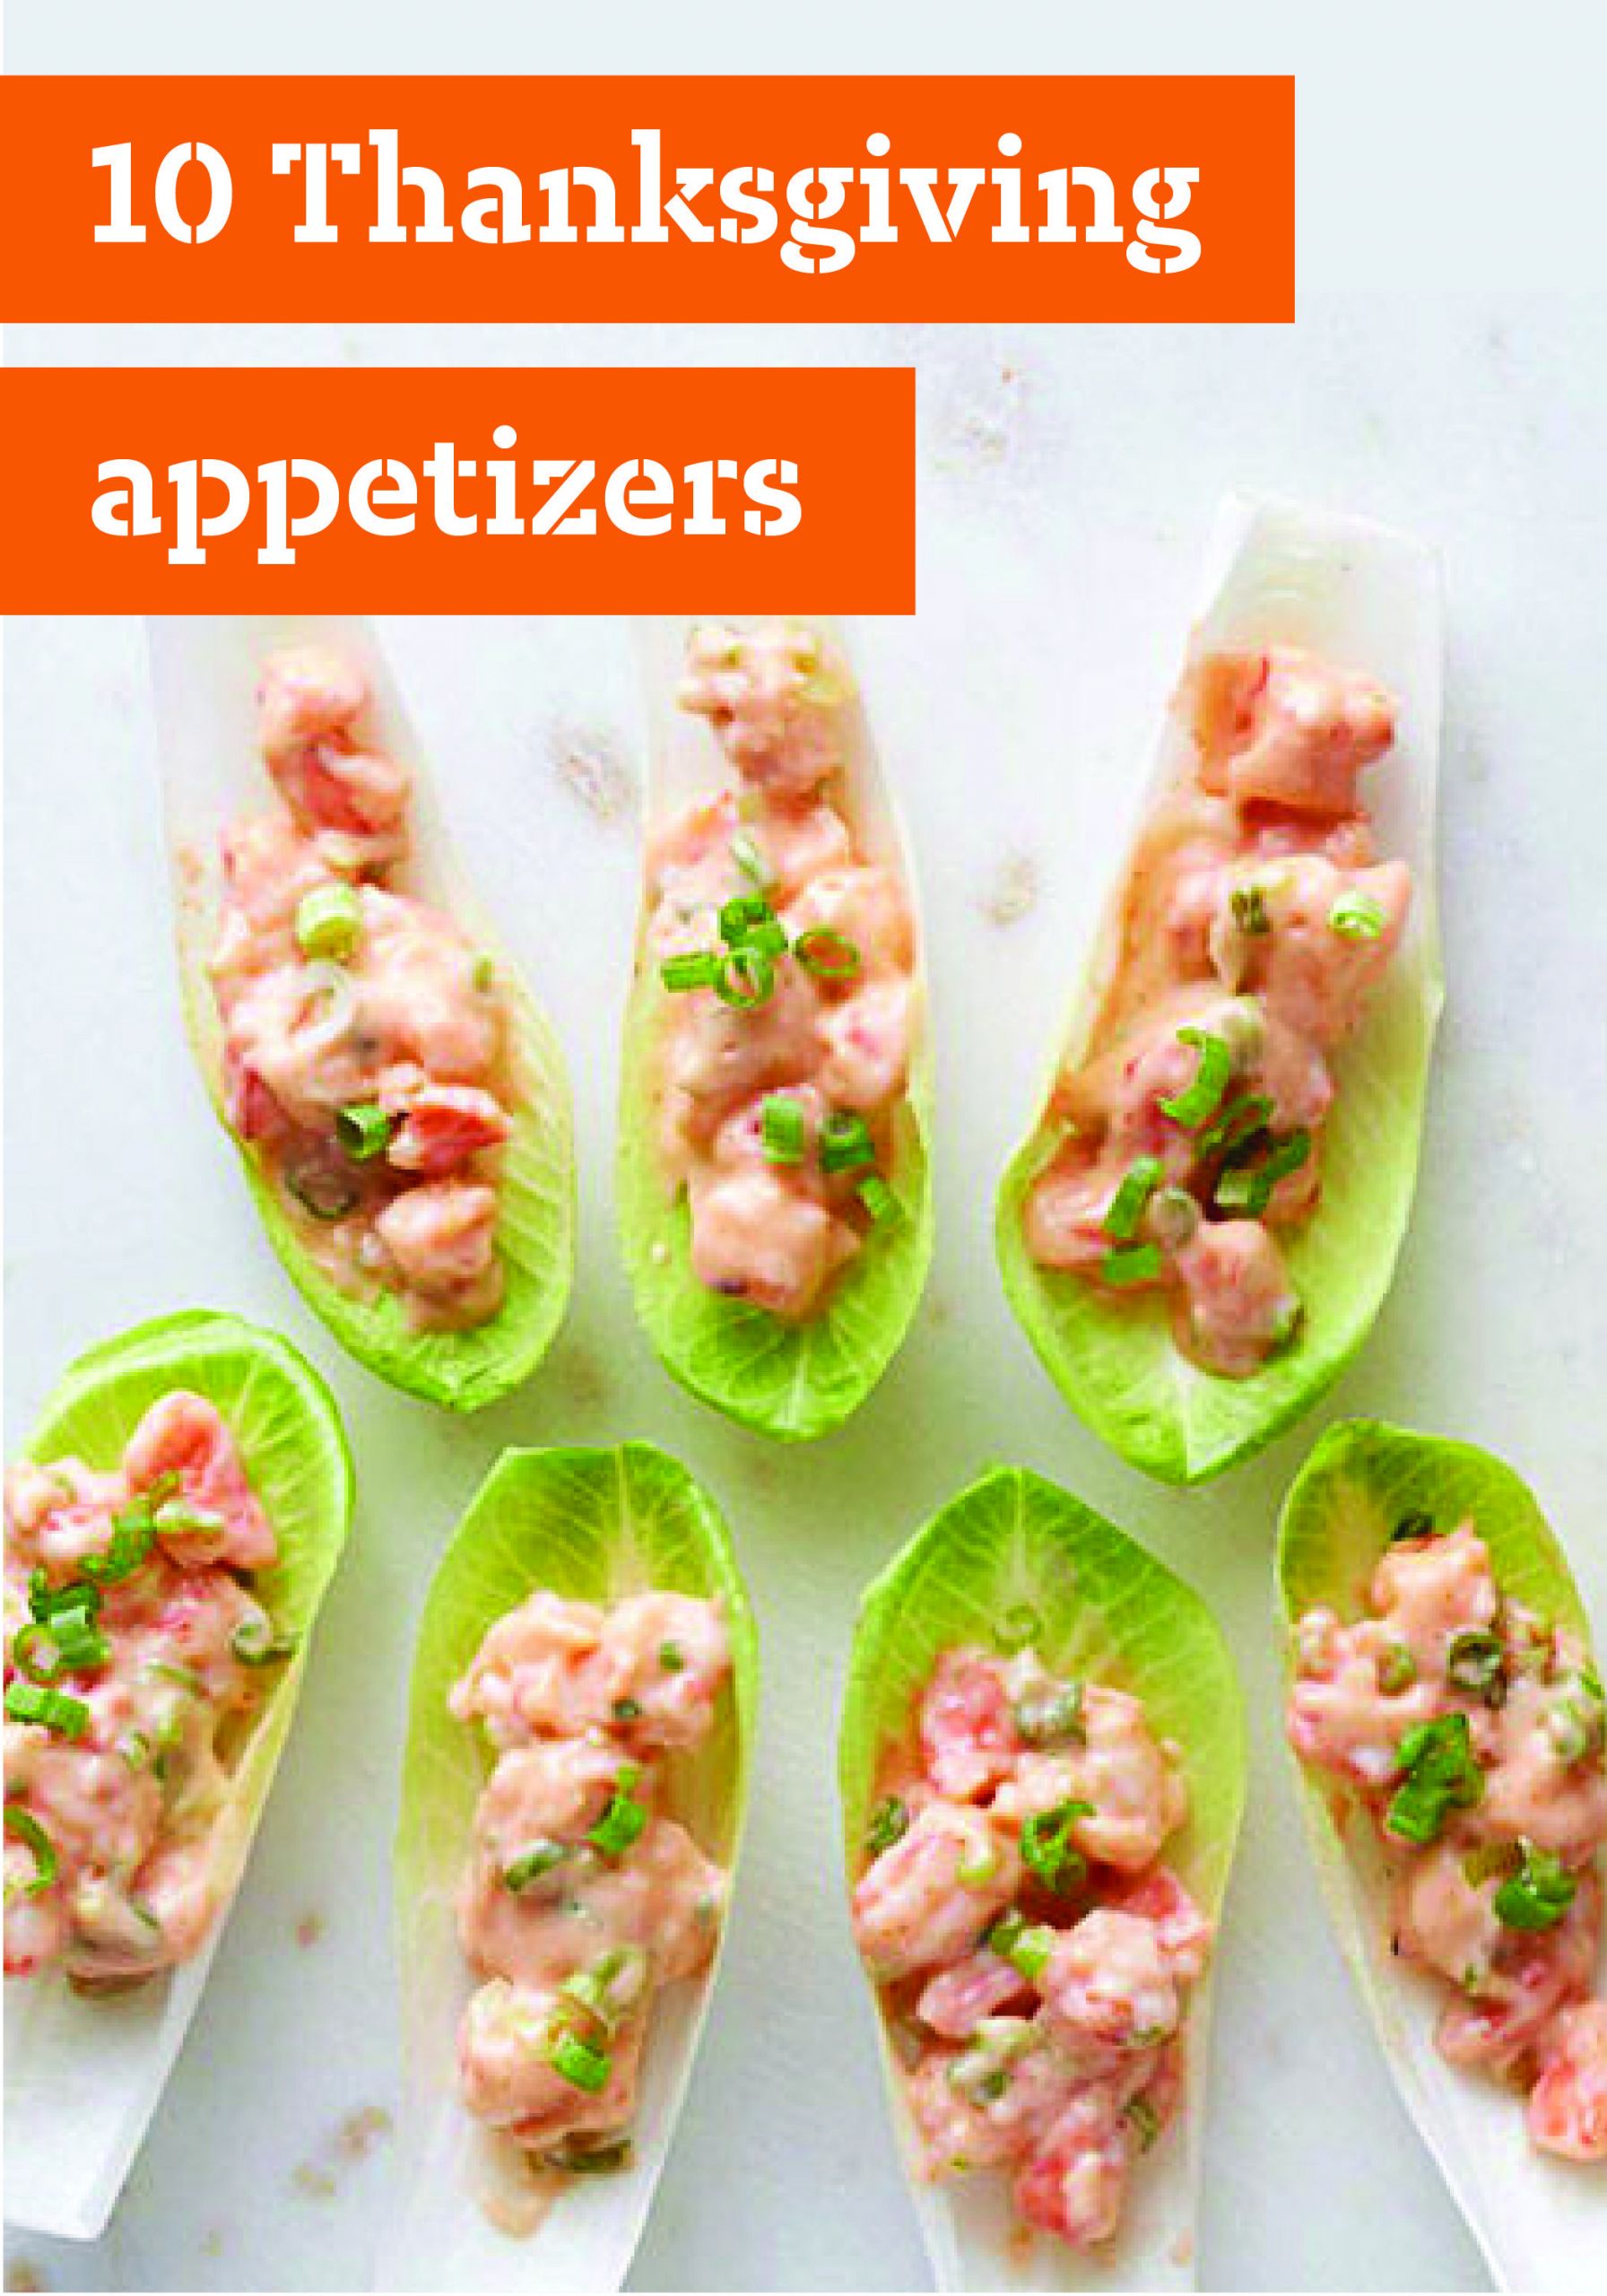 Appetizers For Thanksgiving Dinner Party
 10 Thanksgiving Appetizers – Get your Thanksgiving dinner